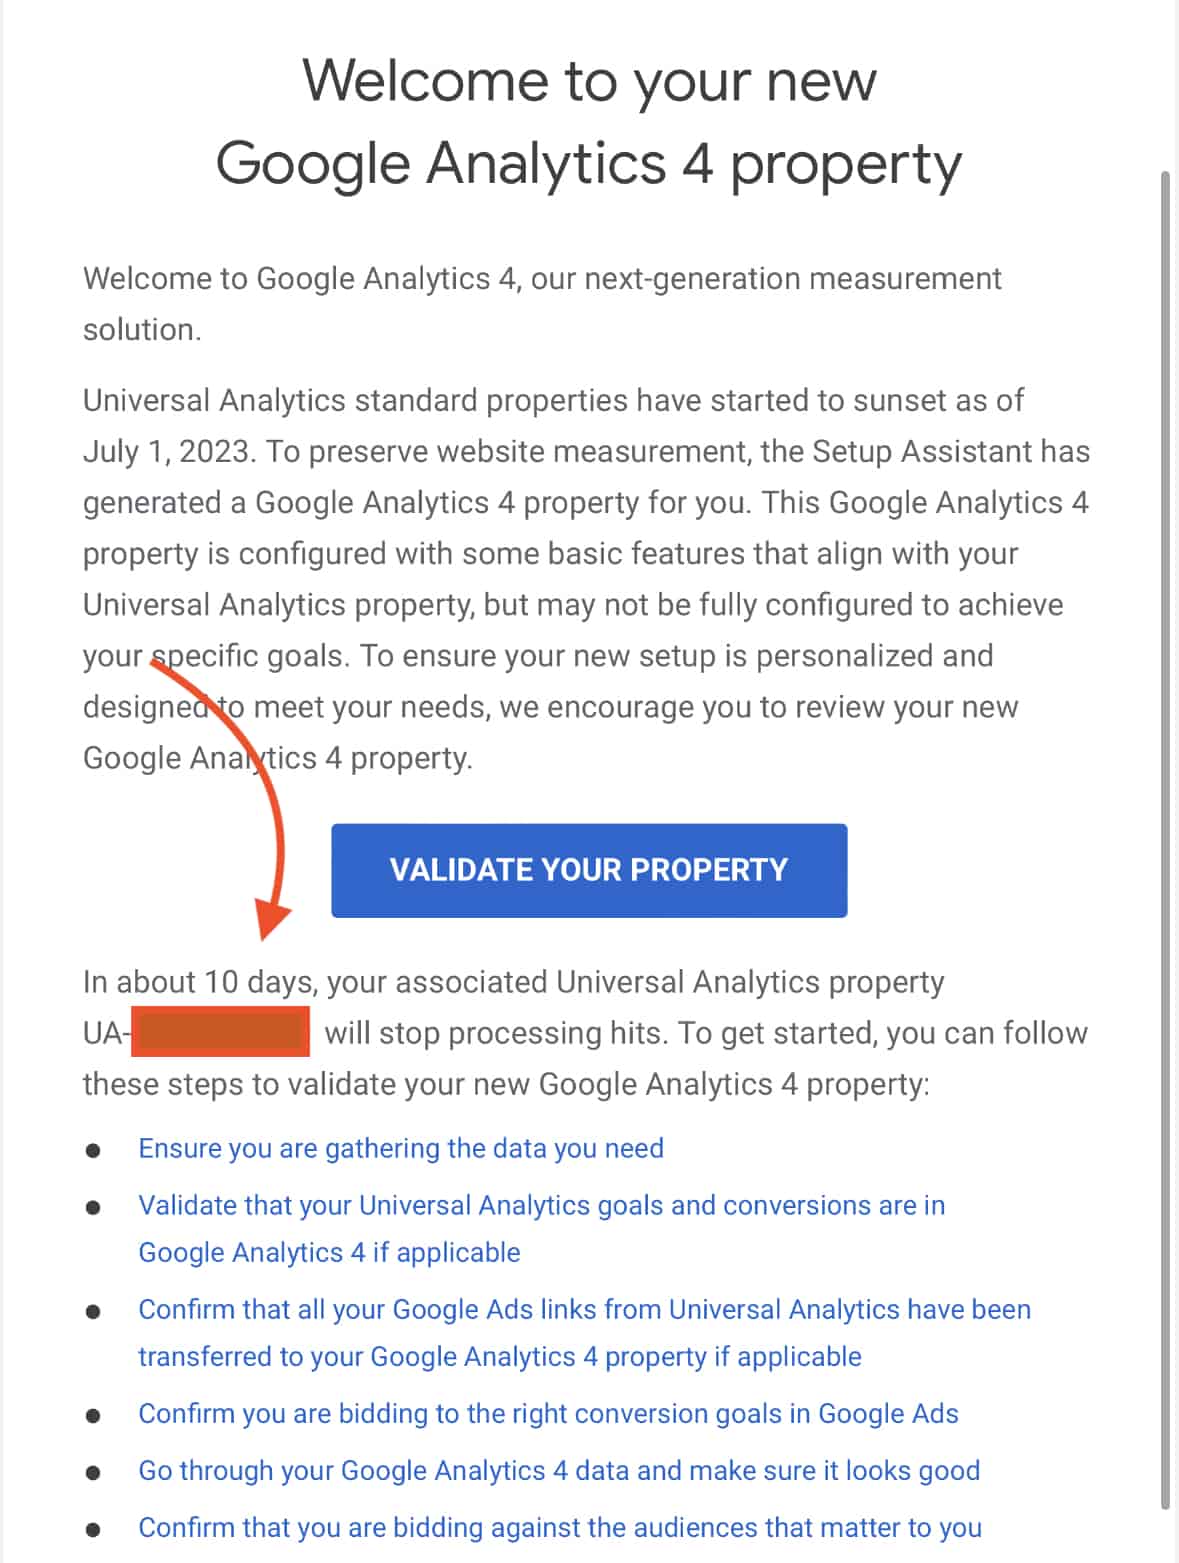 Official Google Analytics email sent to users of Universal Analytics on July 30th 2023